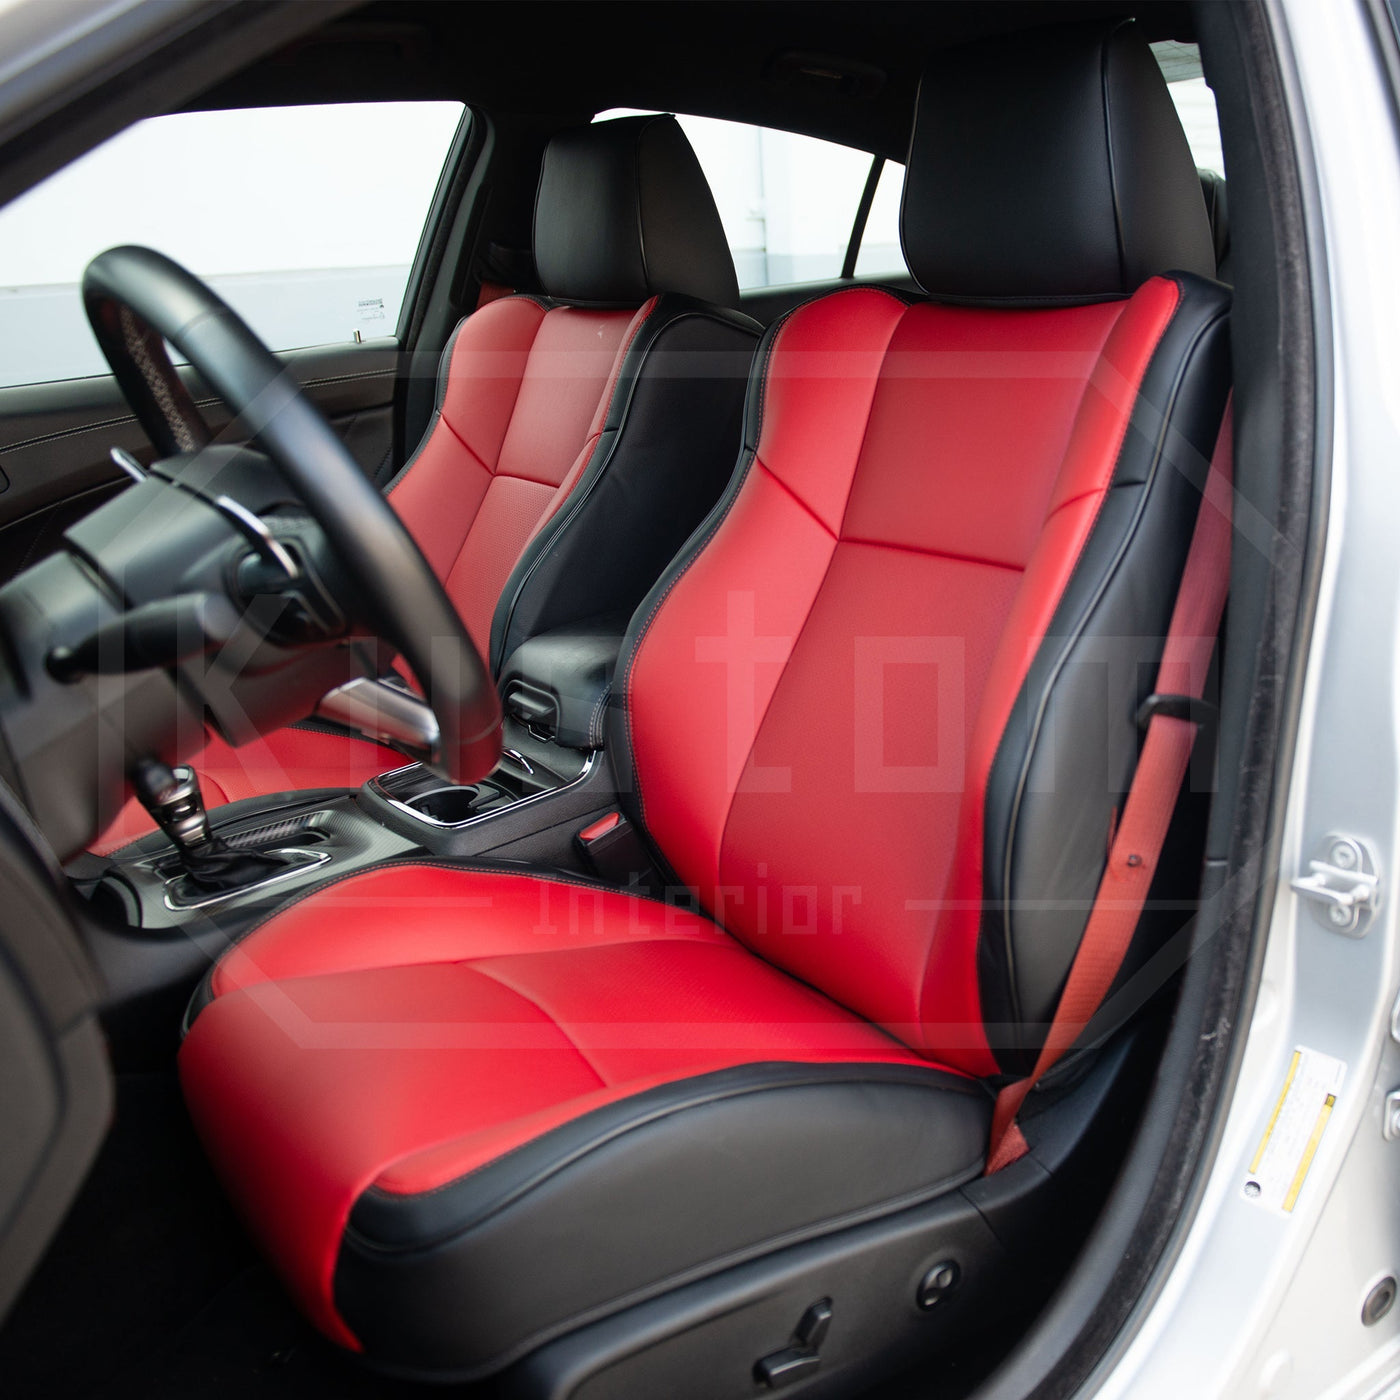 2015-Up Dodge Challenger Custom Leather Seat Covers (Performance Seat)